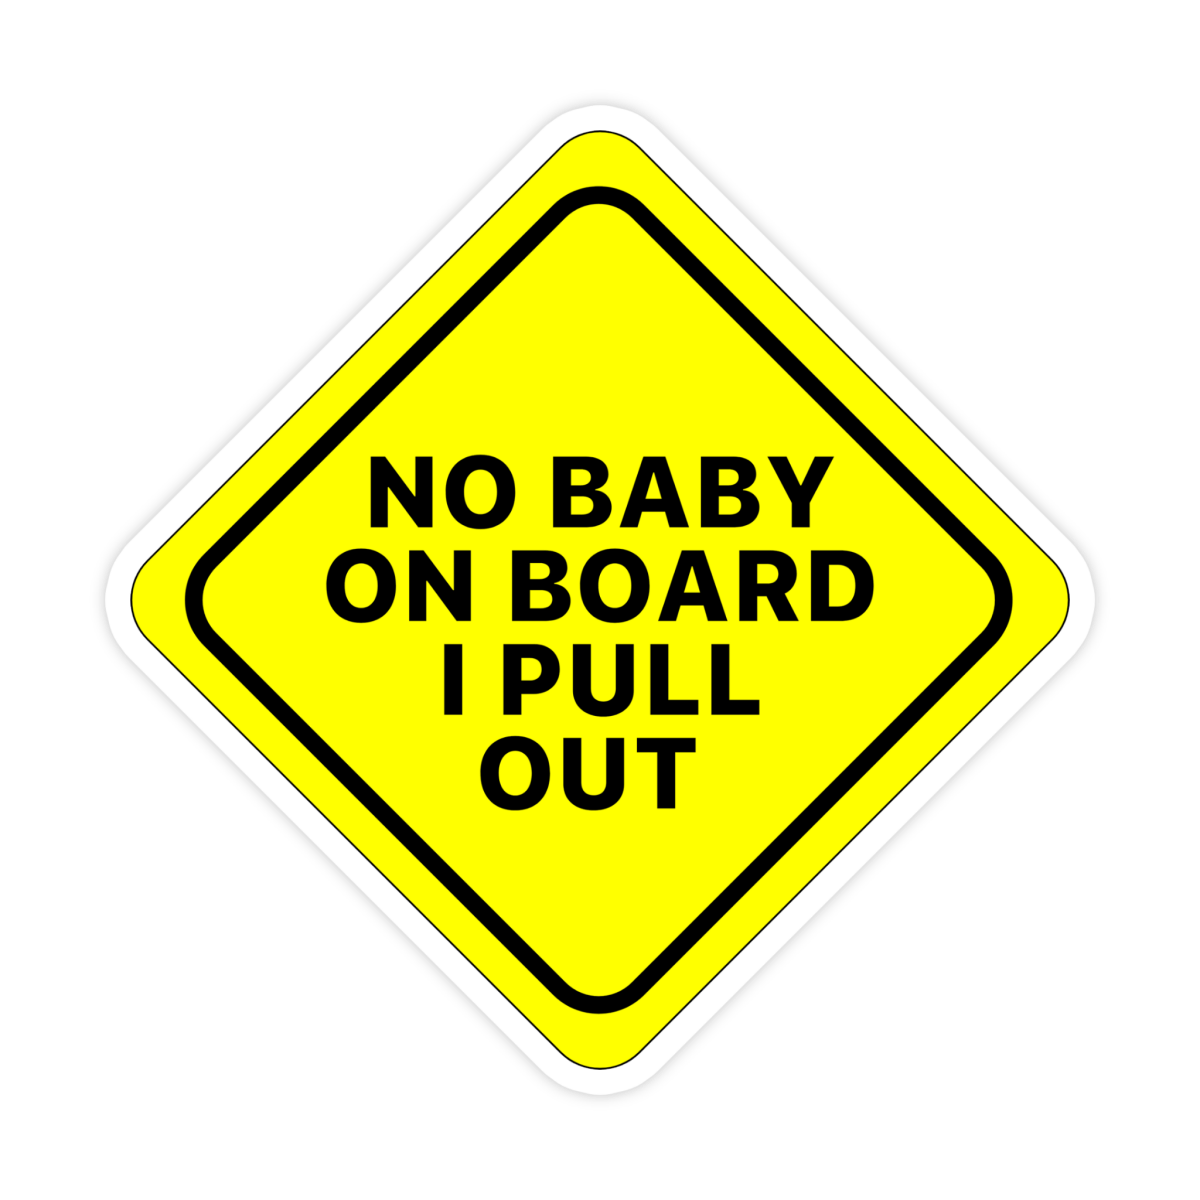 No Baby On Board I Pull Out Bumper Sticker - stickerbullNo Baby On Board I Pull Out Bumper StickerRetail StickerstickerbullstickerbullTaylor_NoBabyPullOut [#101]No Baby On Board I Pull Out Bumper Sticker